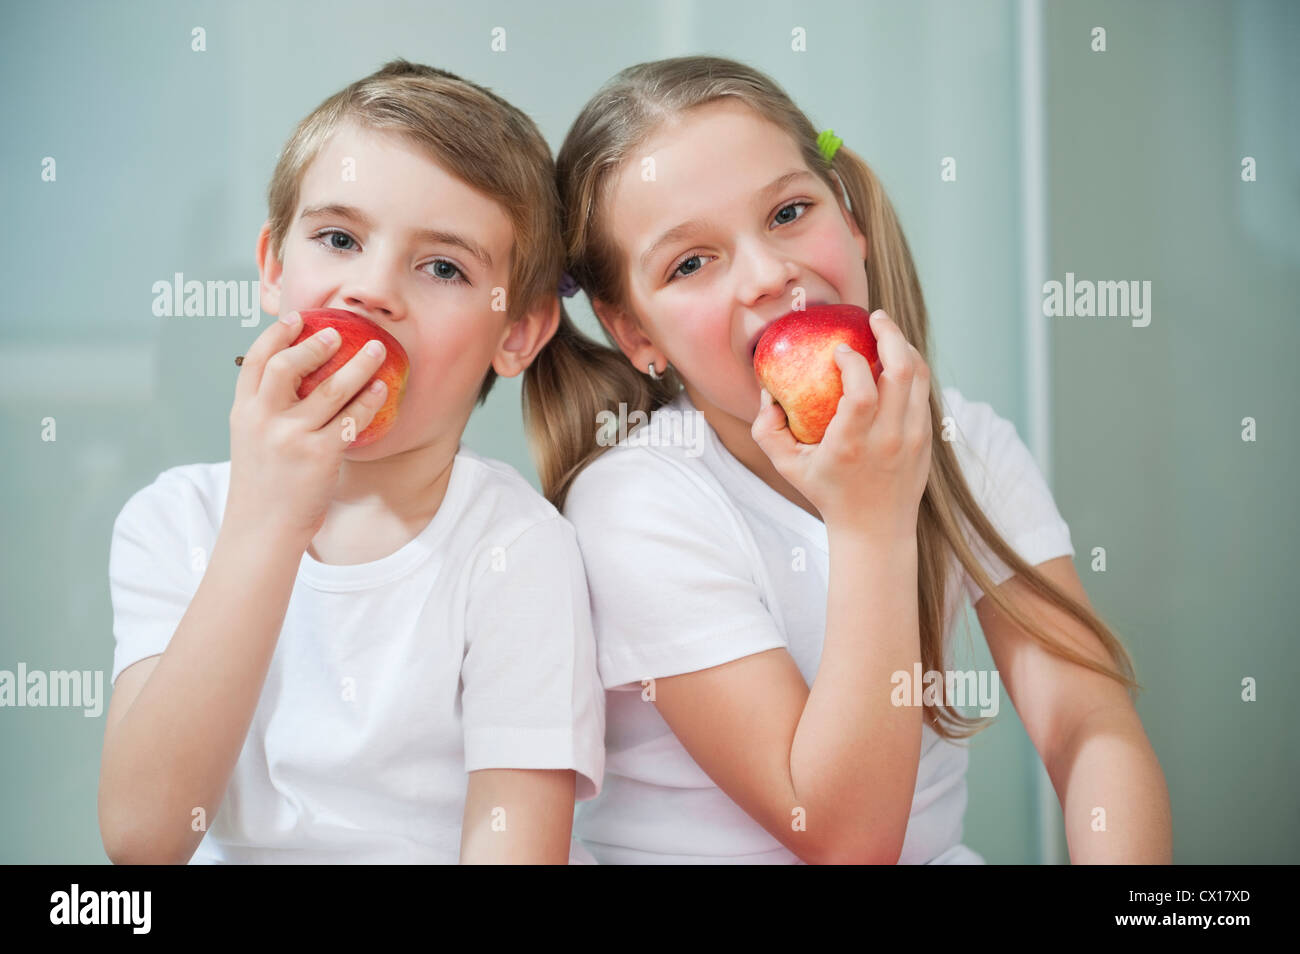 Portrait of young boy and girl in white tshirts eating apples Stock Photo